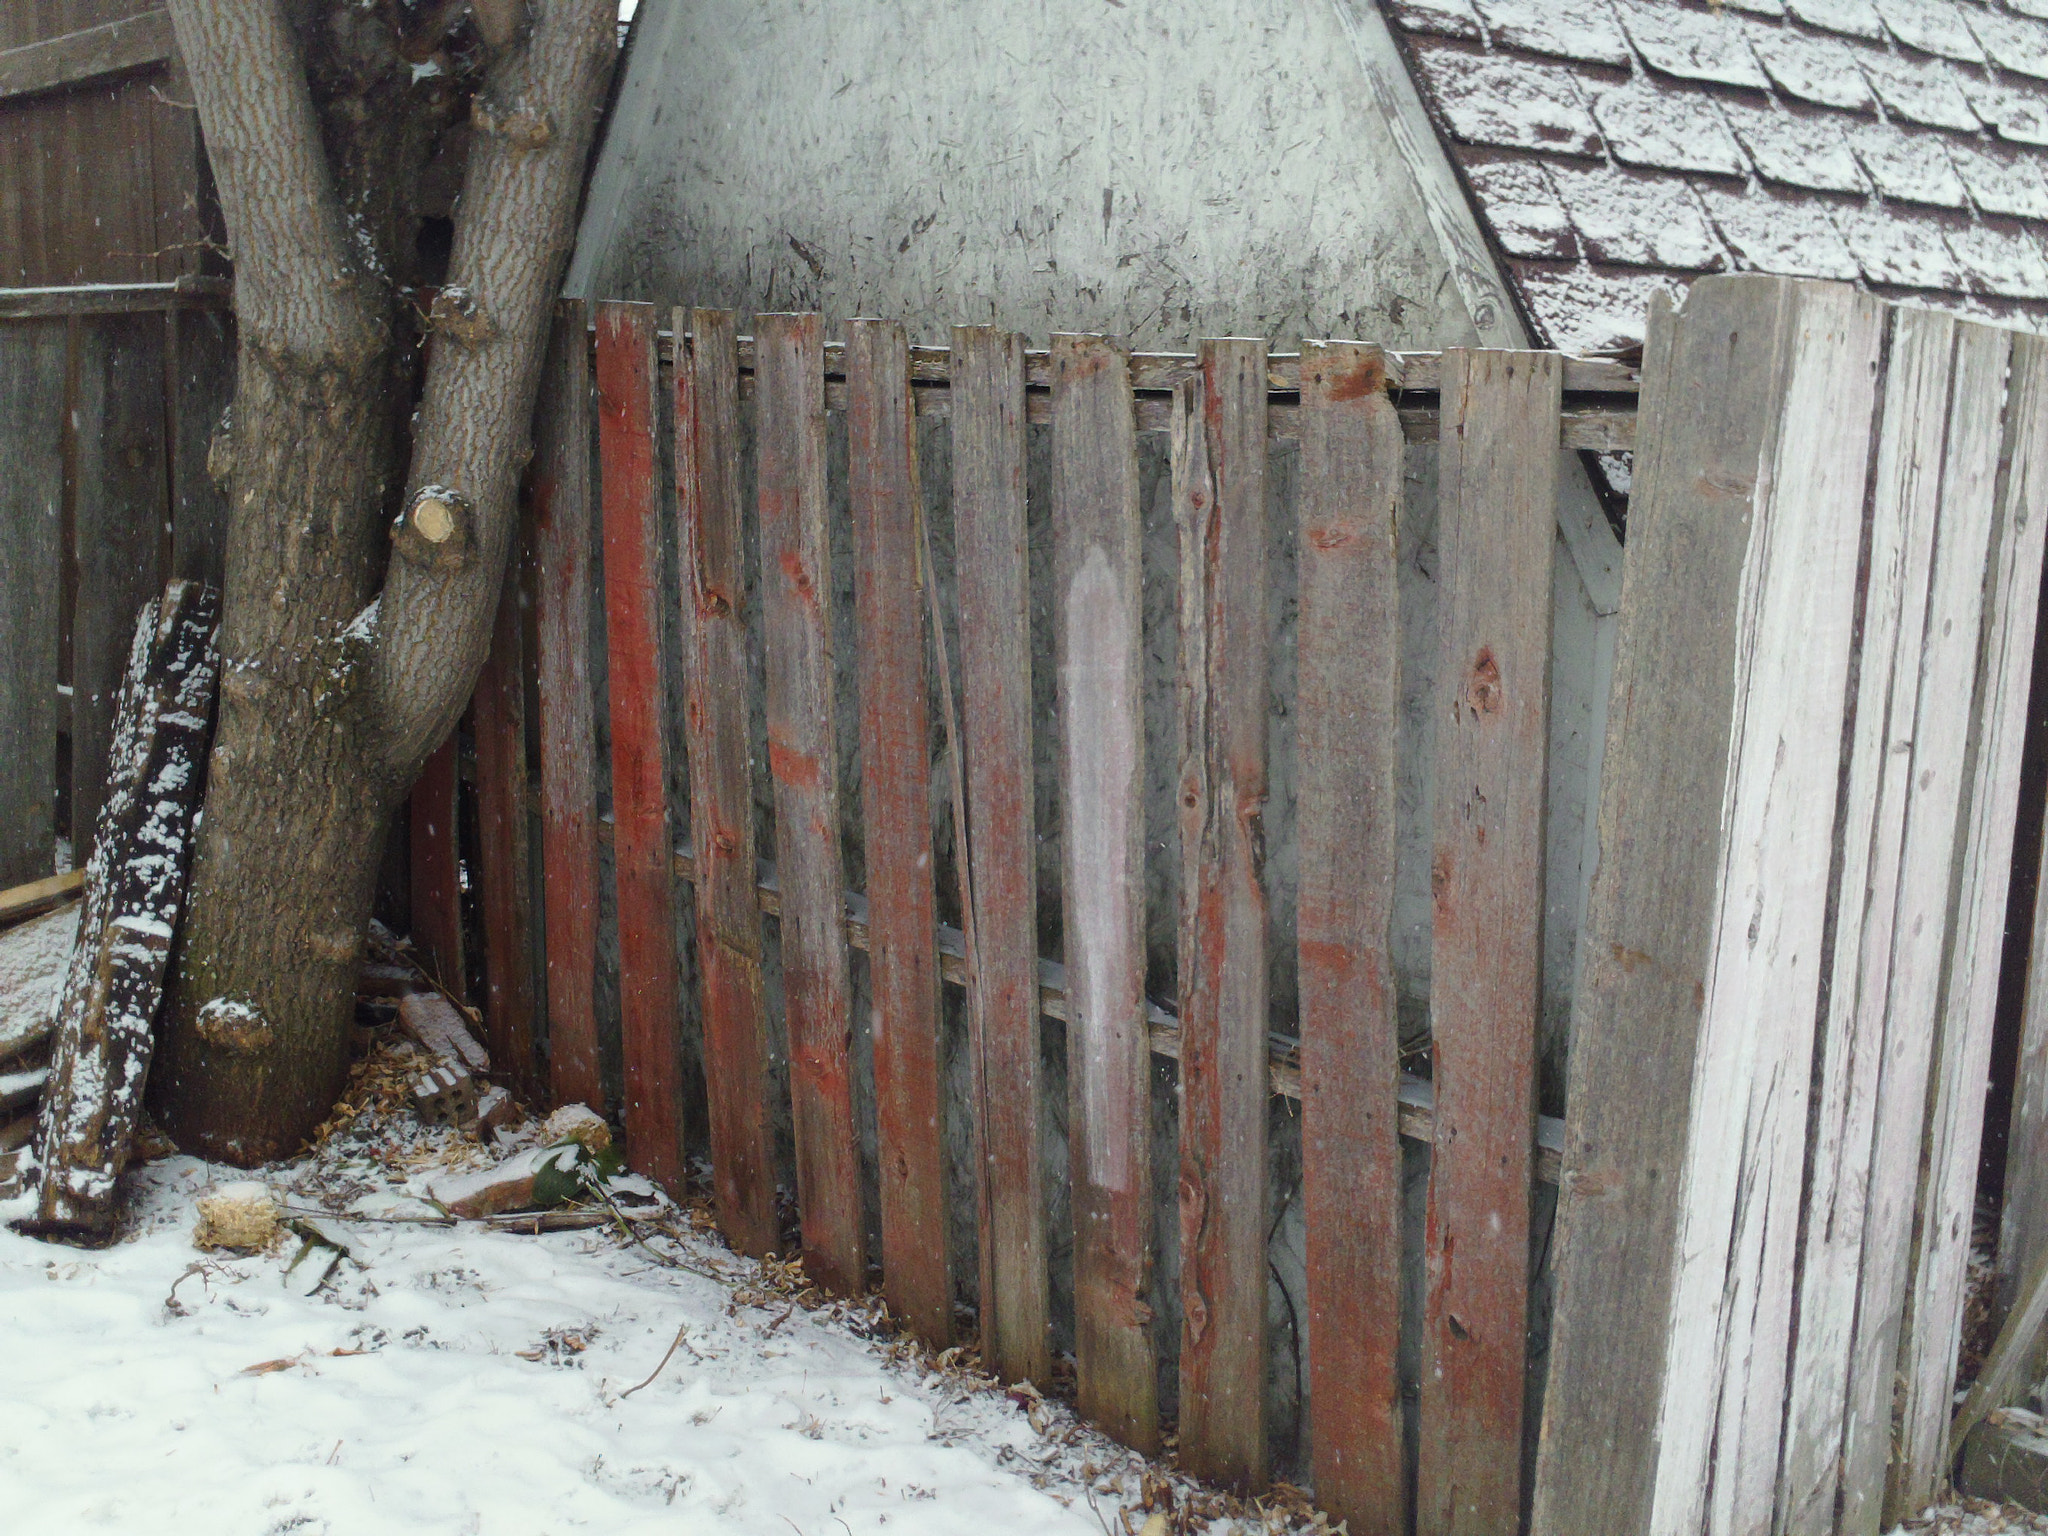 Samsung HMX-W300 sample photo. Snow, shed, red fence photography